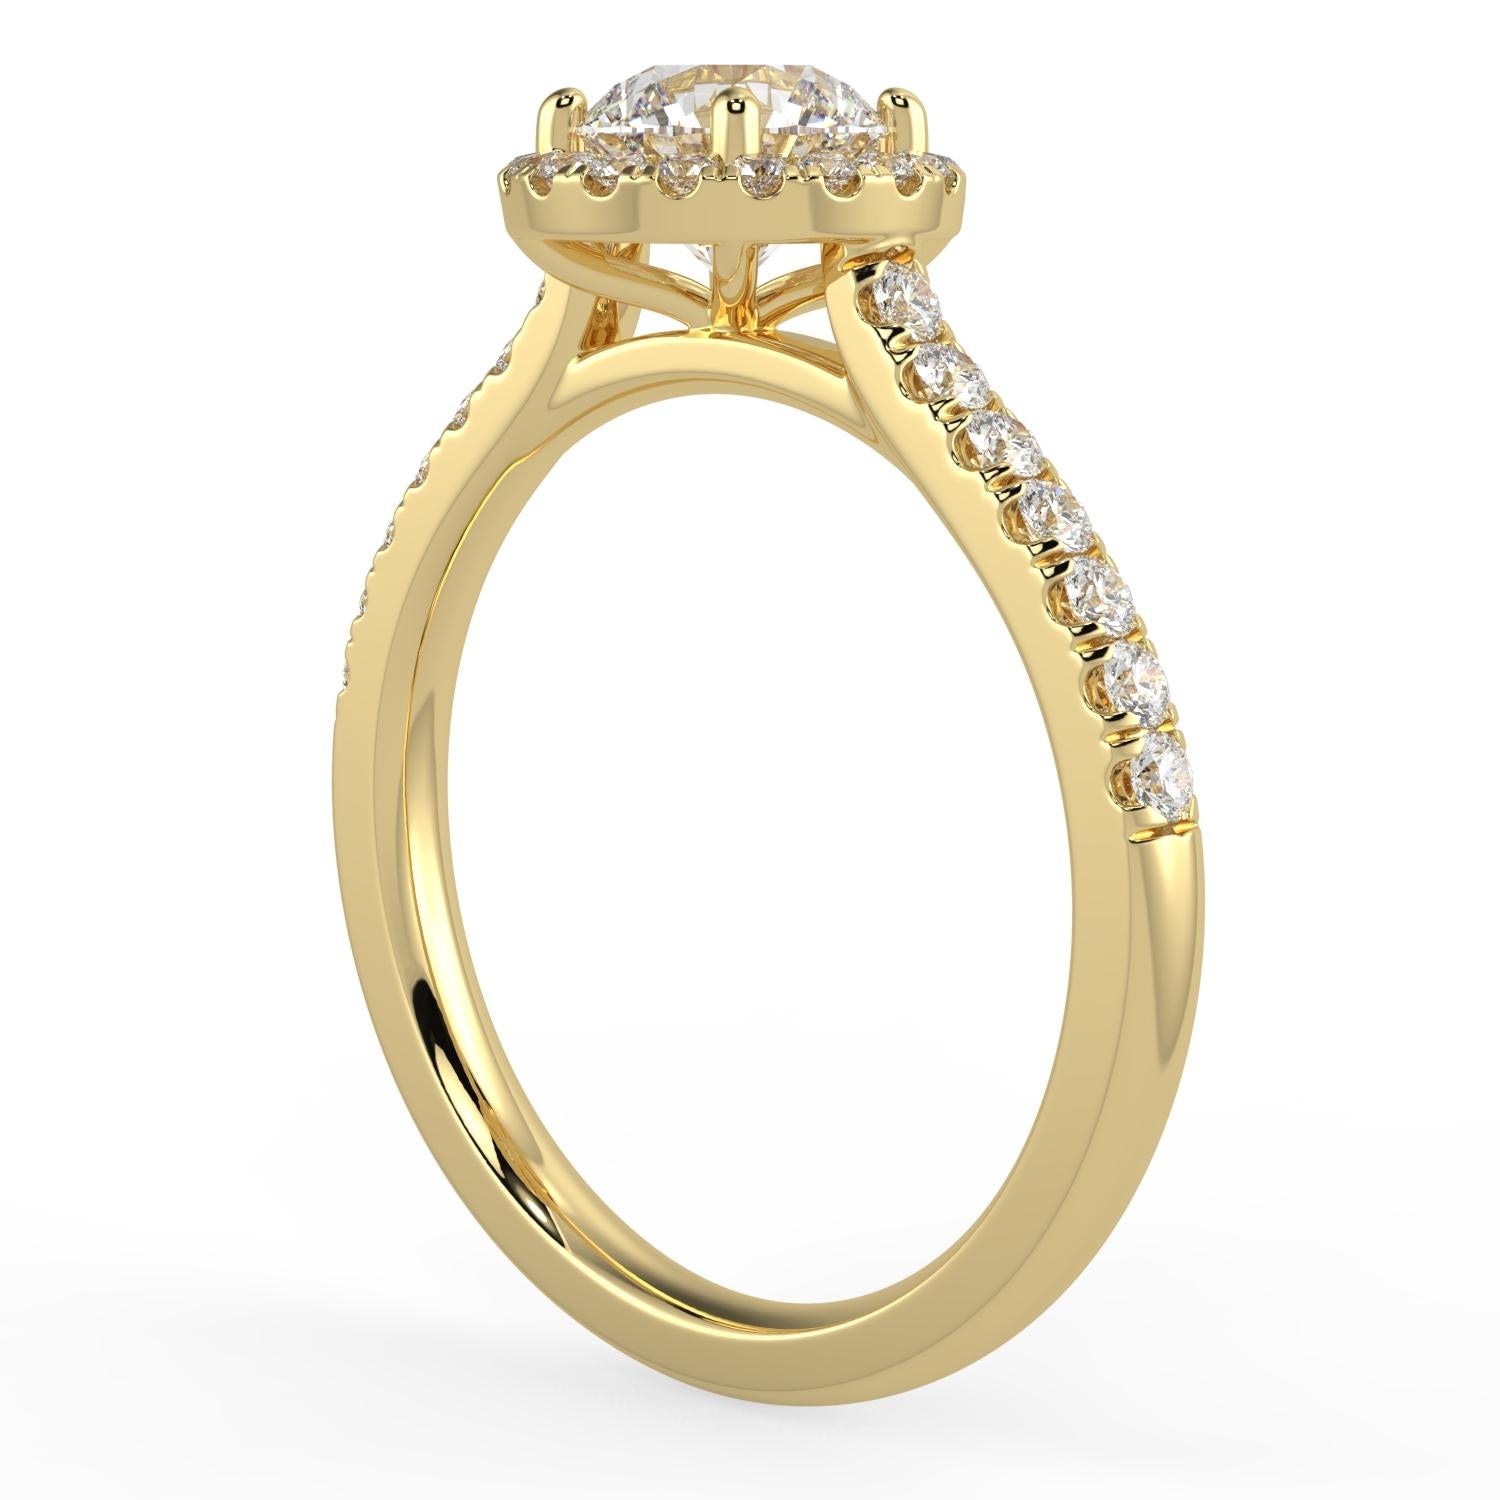 Aamiaa DIAMOND RING
1ct Natural Diamond G-H Color SI Clarity Perfect Design Shape Halo Fashion Stunning Promise Ring 14K Yellow Gold
Specification:
Brand: Aamiaa
Metal: Yellow Gold
Metal Purity: 14k
Design: Halo
Center Carat Weight: .70CT
Side